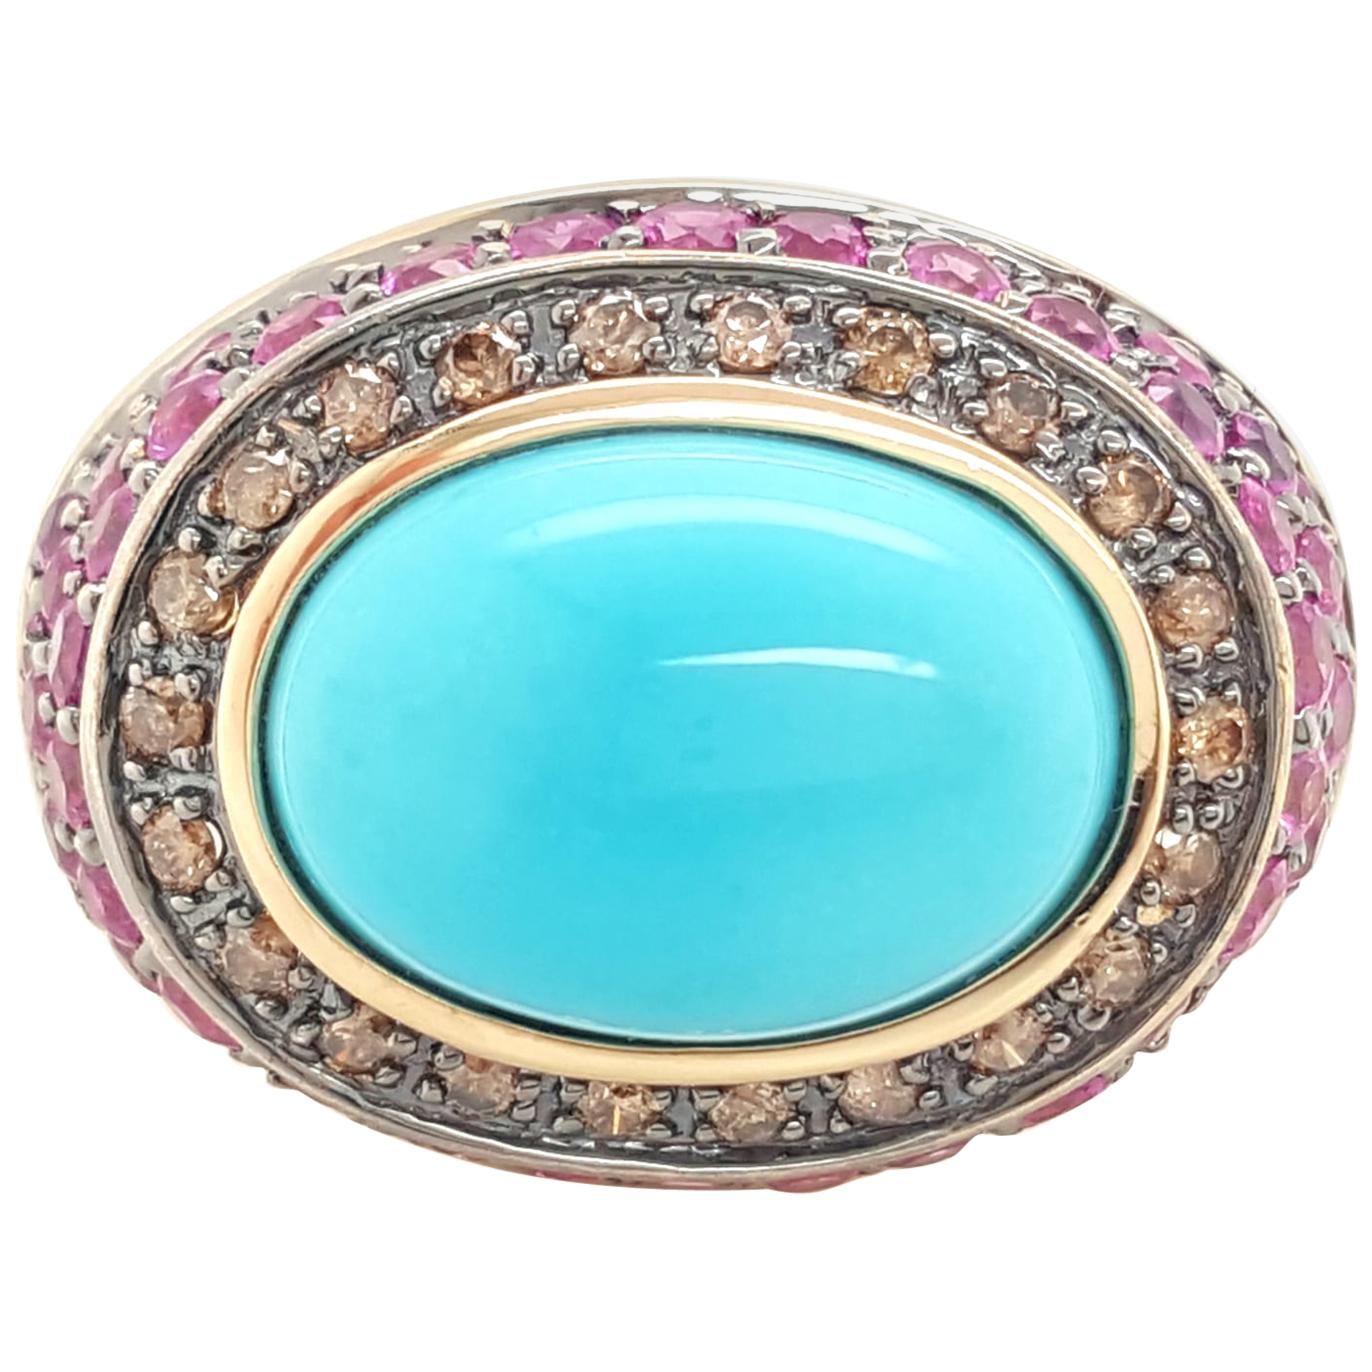 LeVian Robins Egg Blue Turquoise Diamond and Ruby 14 Karat Yellow Gold Ring